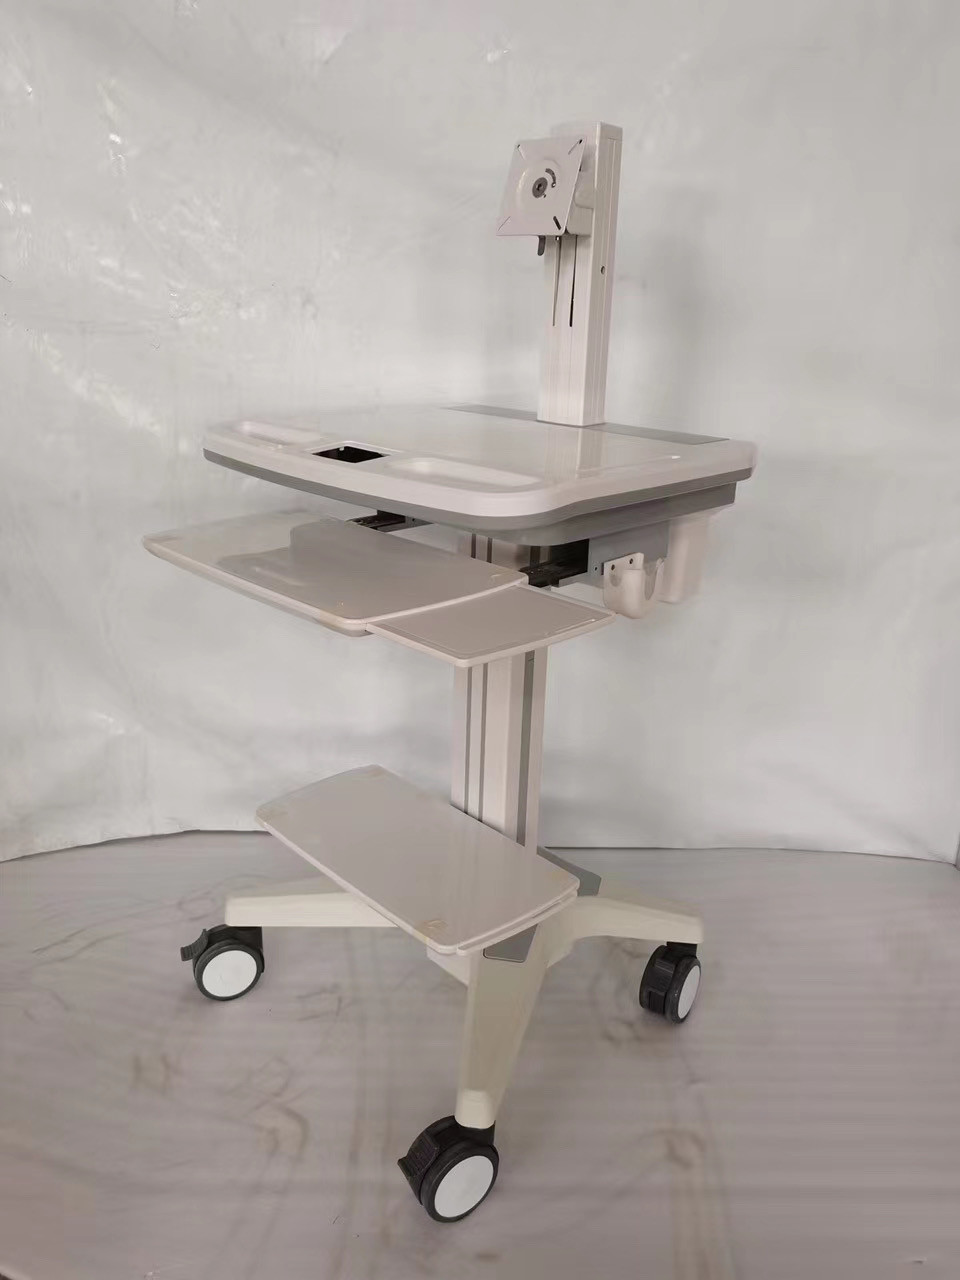  Laboratory Medical Hospital Workstation Mobile Simple Stable computer trolley Manufactures